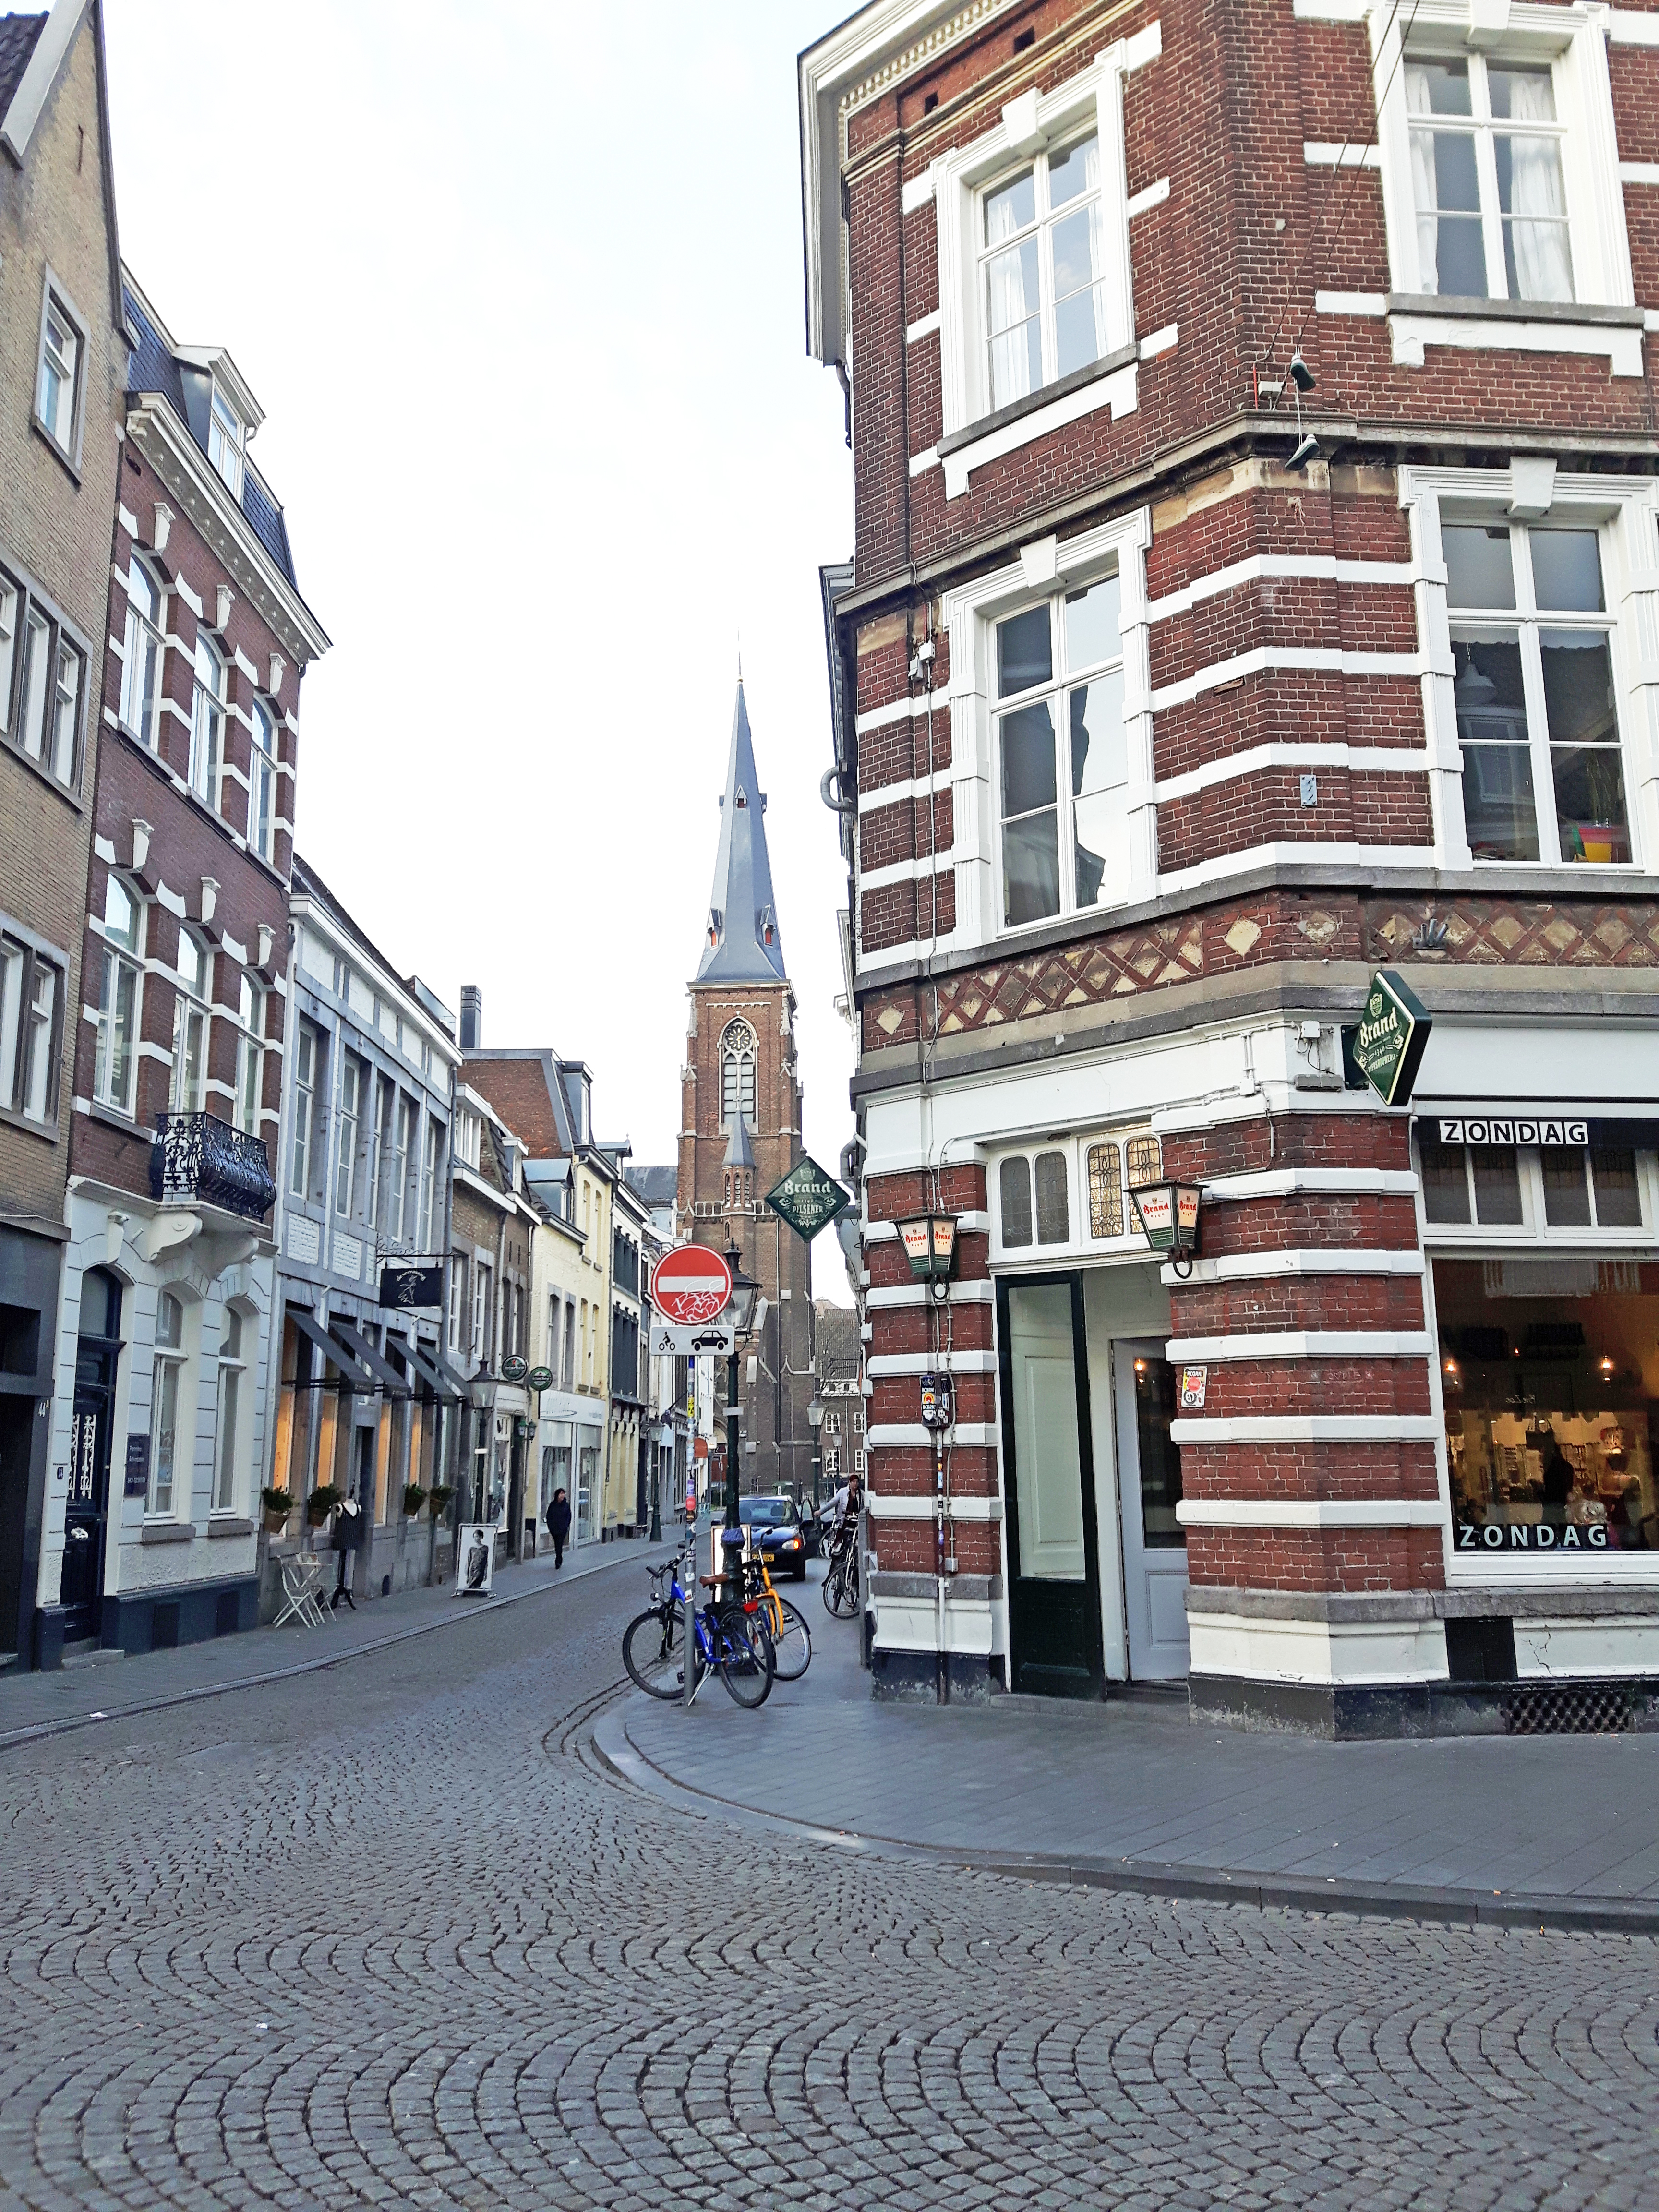 City_Guide_To_Maastricht_Netherlands